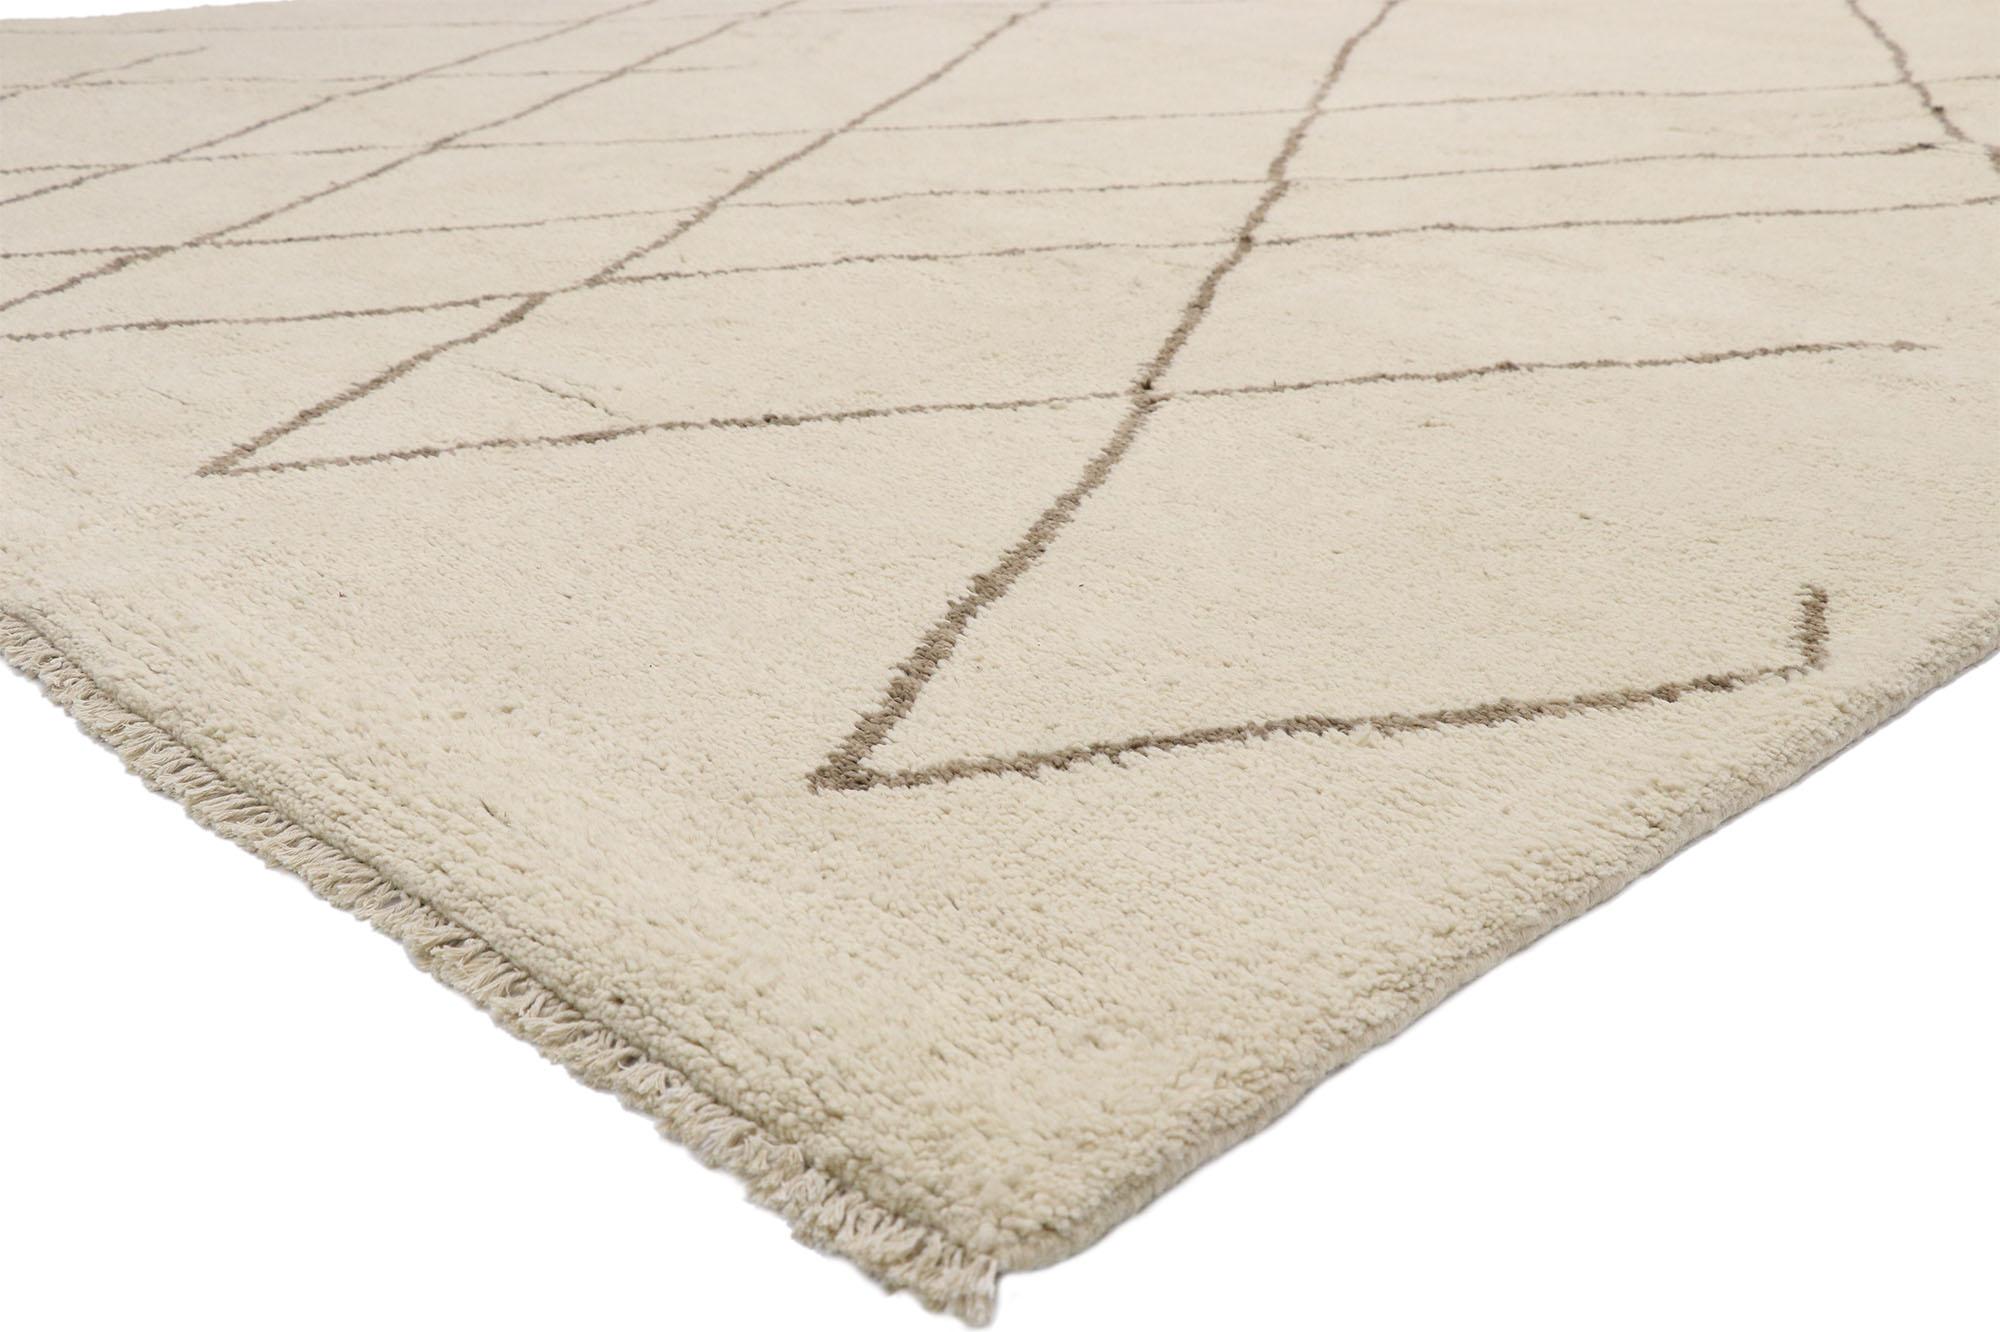 80541, new contemporary large Moroccan Area rug with Cozy Organic Modern style. Warm and inviting combined with cozy comfort, this hand knotted wool contemporary large Moroccan area rug embodies organic modern style. The large Moroccan rug features